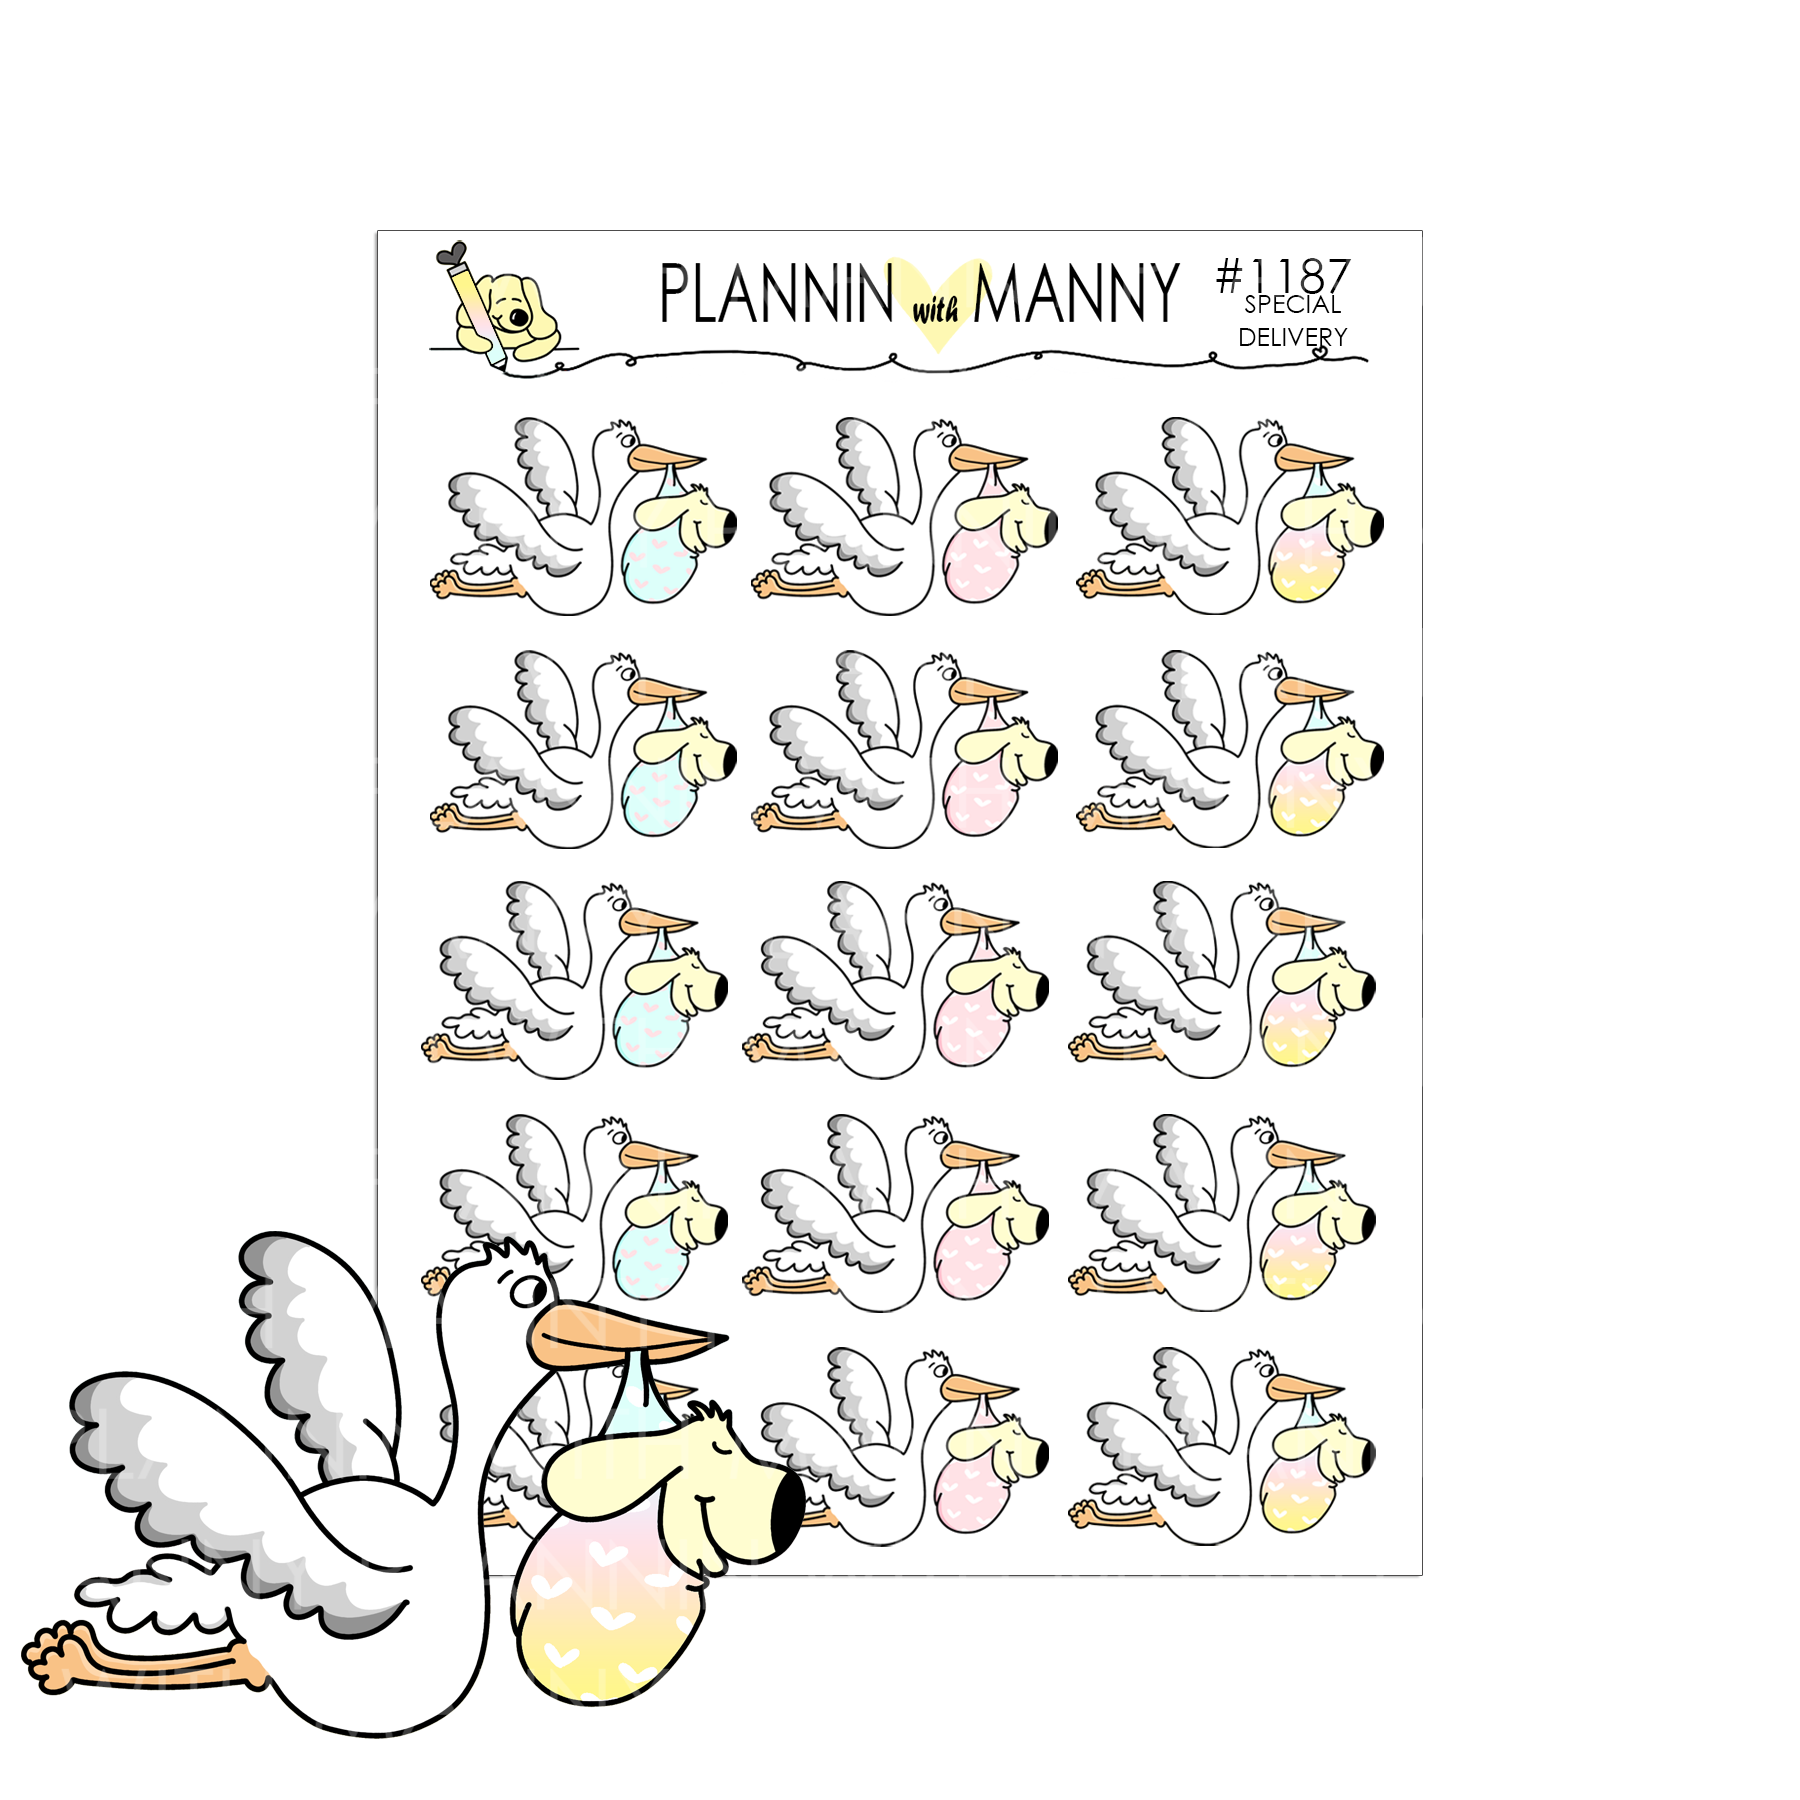 1187 SPECIAL DELIVERY STORK Planner Stickers